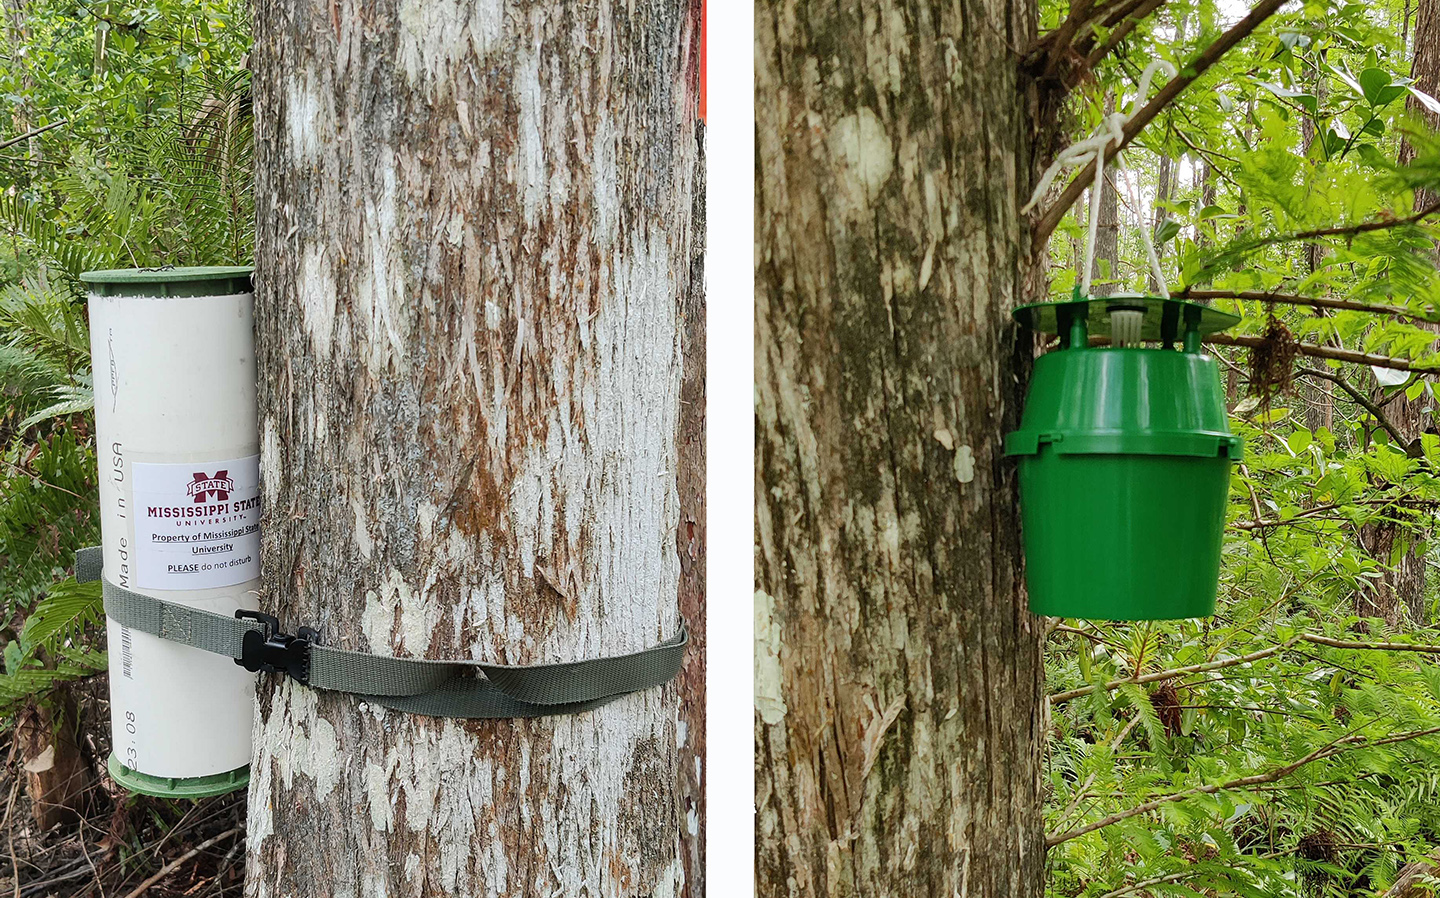 Traps affixed to tree trunks